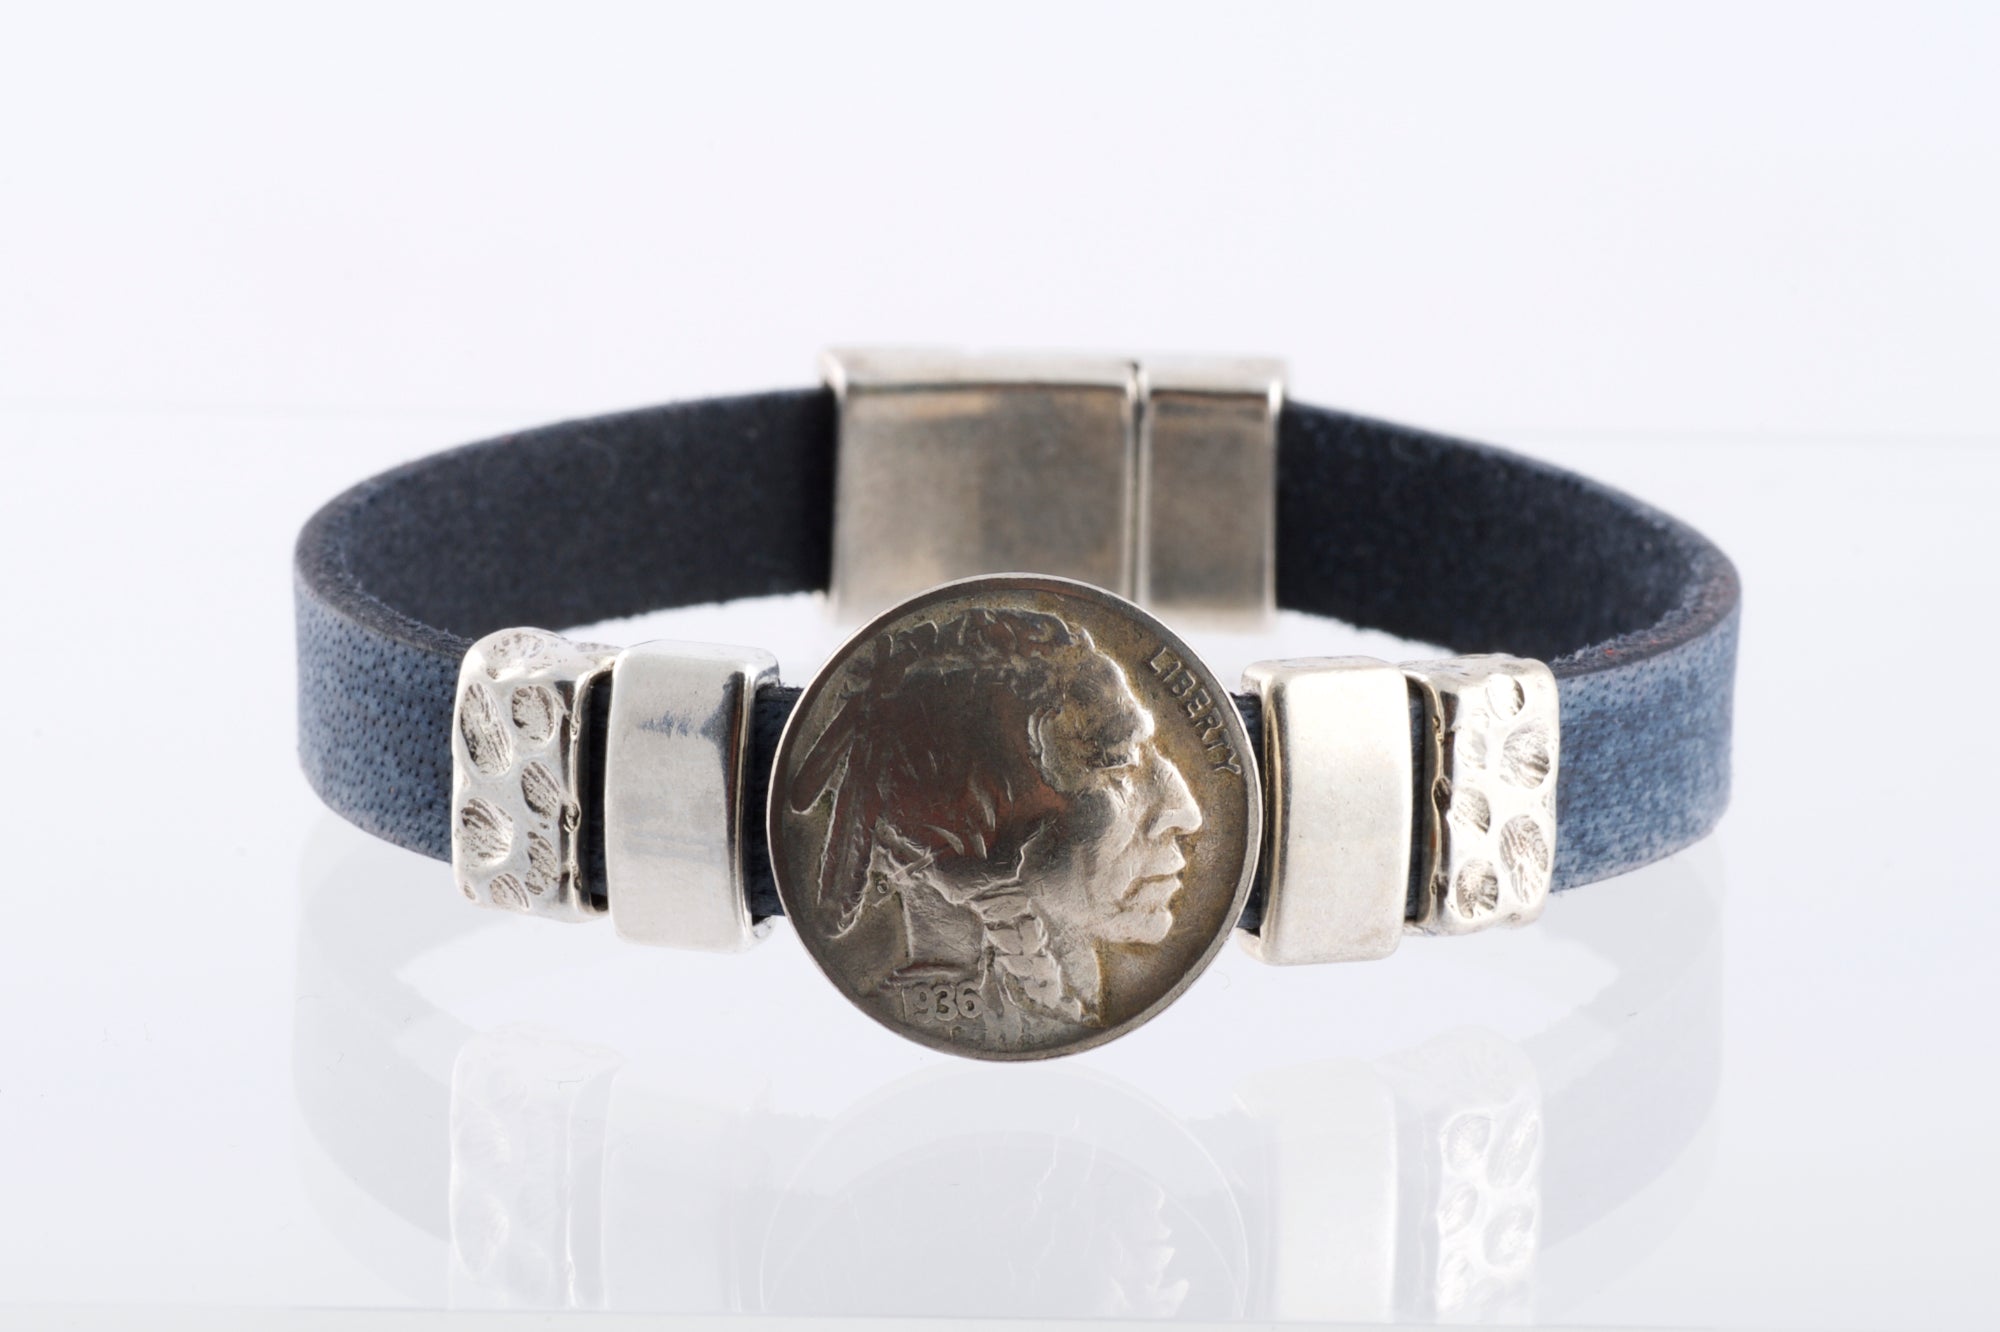 Cathy Crelling - Bracelets from Cathy Crelling.   Bison Leather / Silver / Buffalo Nickel